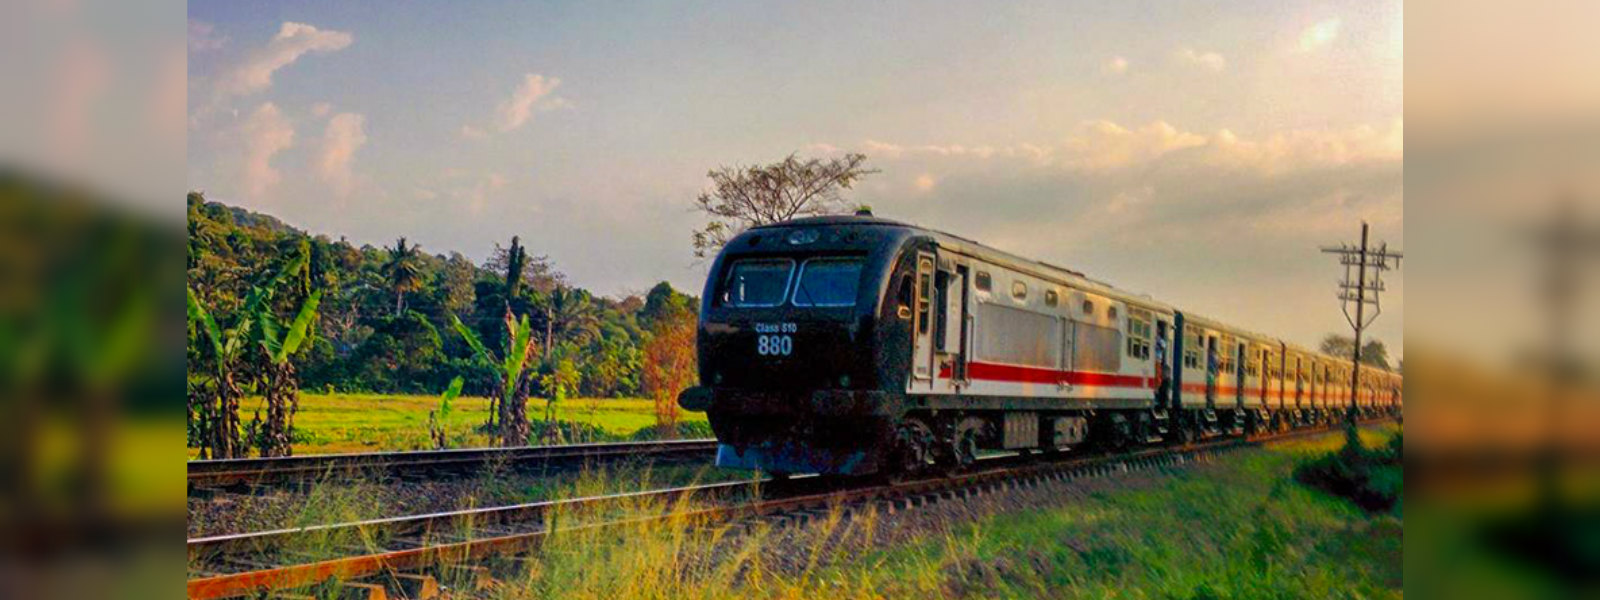 Two new trains for the Kelani Weli route